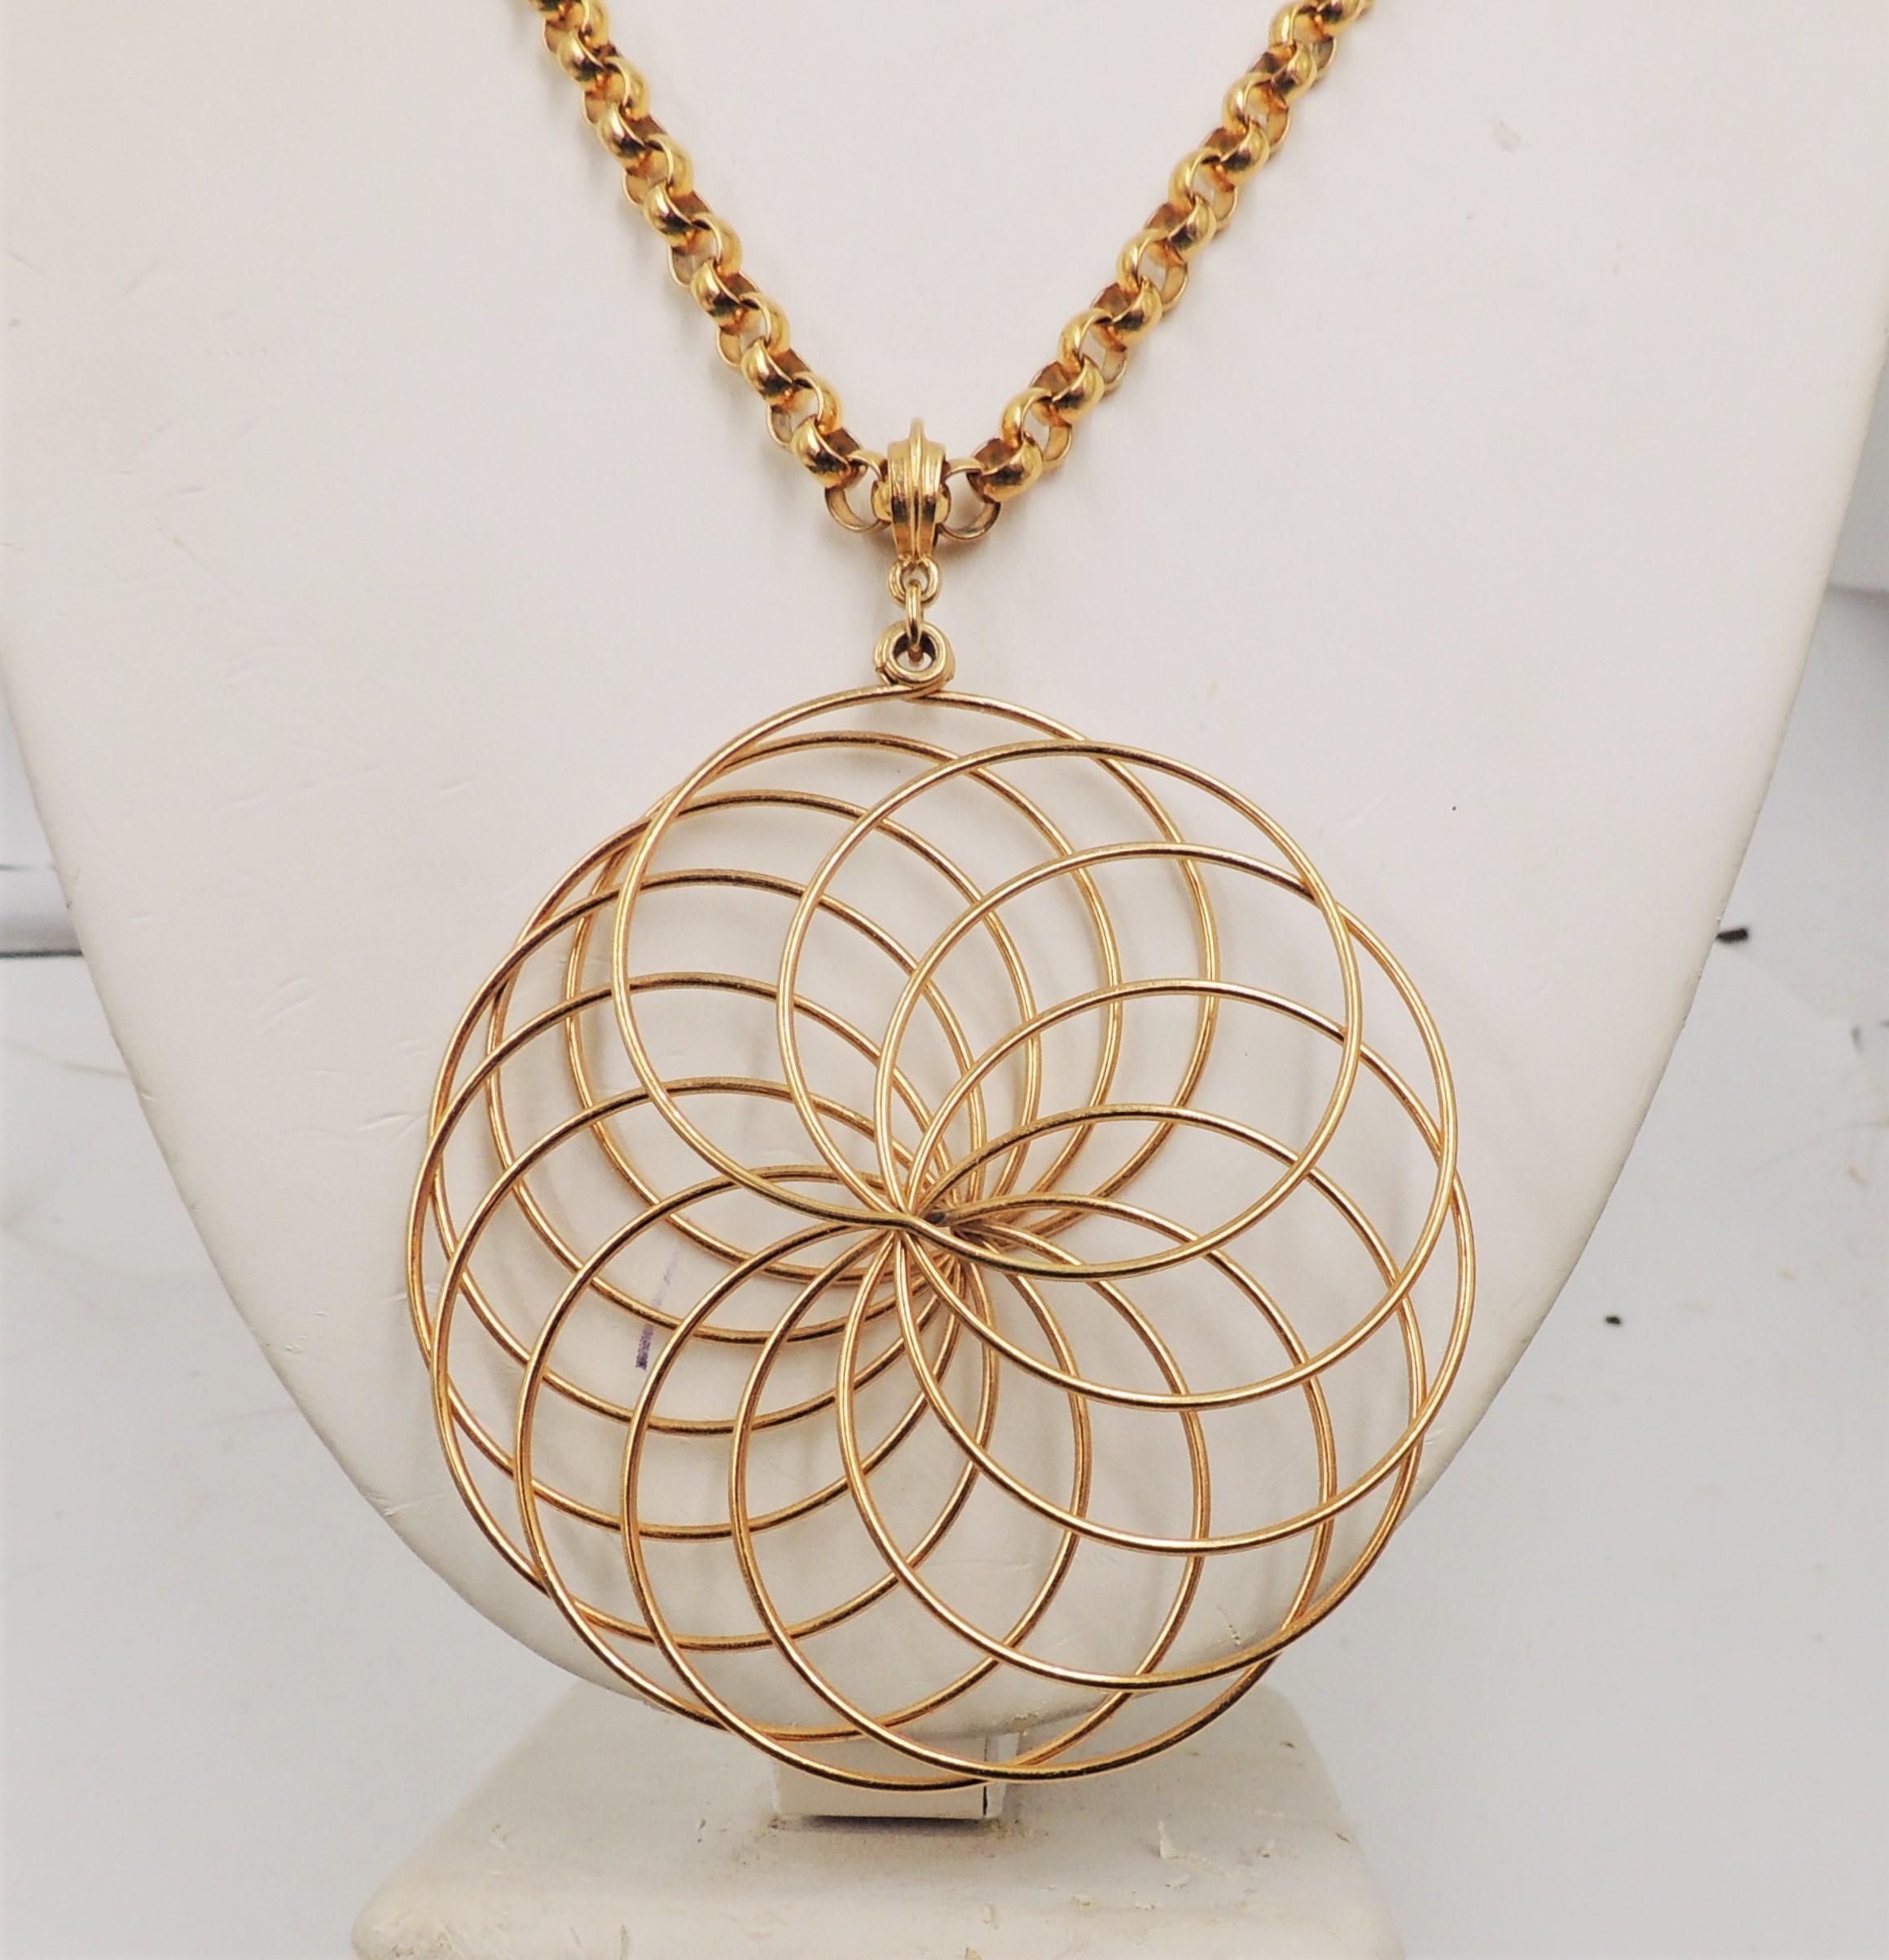 Vintage Signed Crown Trifari Goldtone Spiral Pendant Necklace, 1974 Ad Piece In Excellent Condition For Sale In Easton, PA